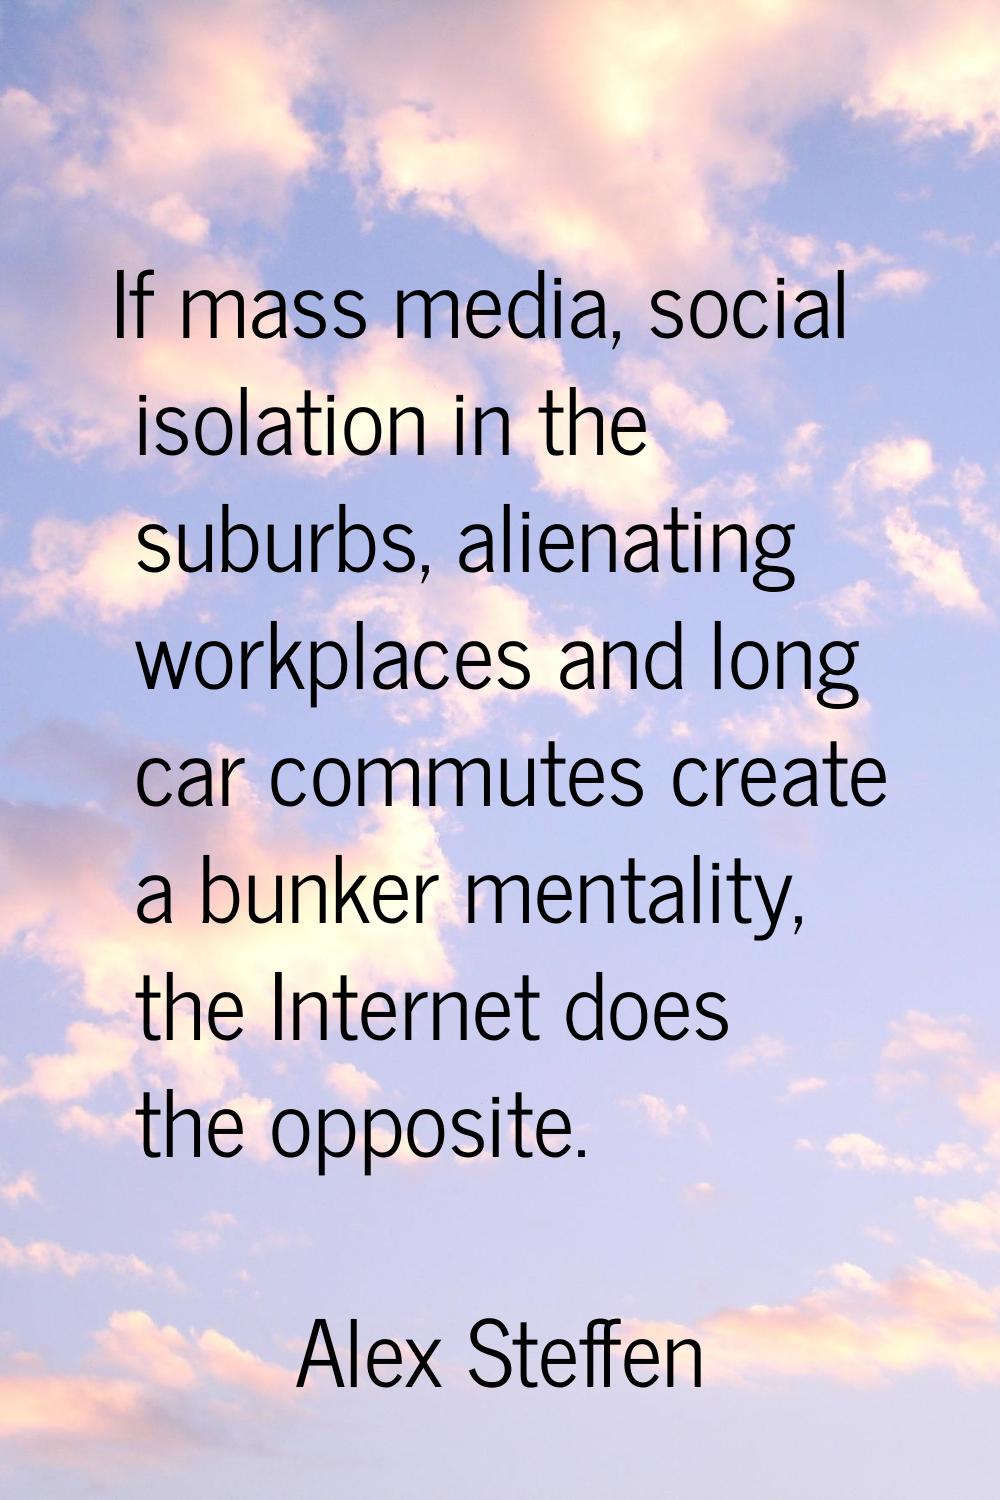 If mass media, social isolation in the suburbs, alienating workplaces and long car commutes create 